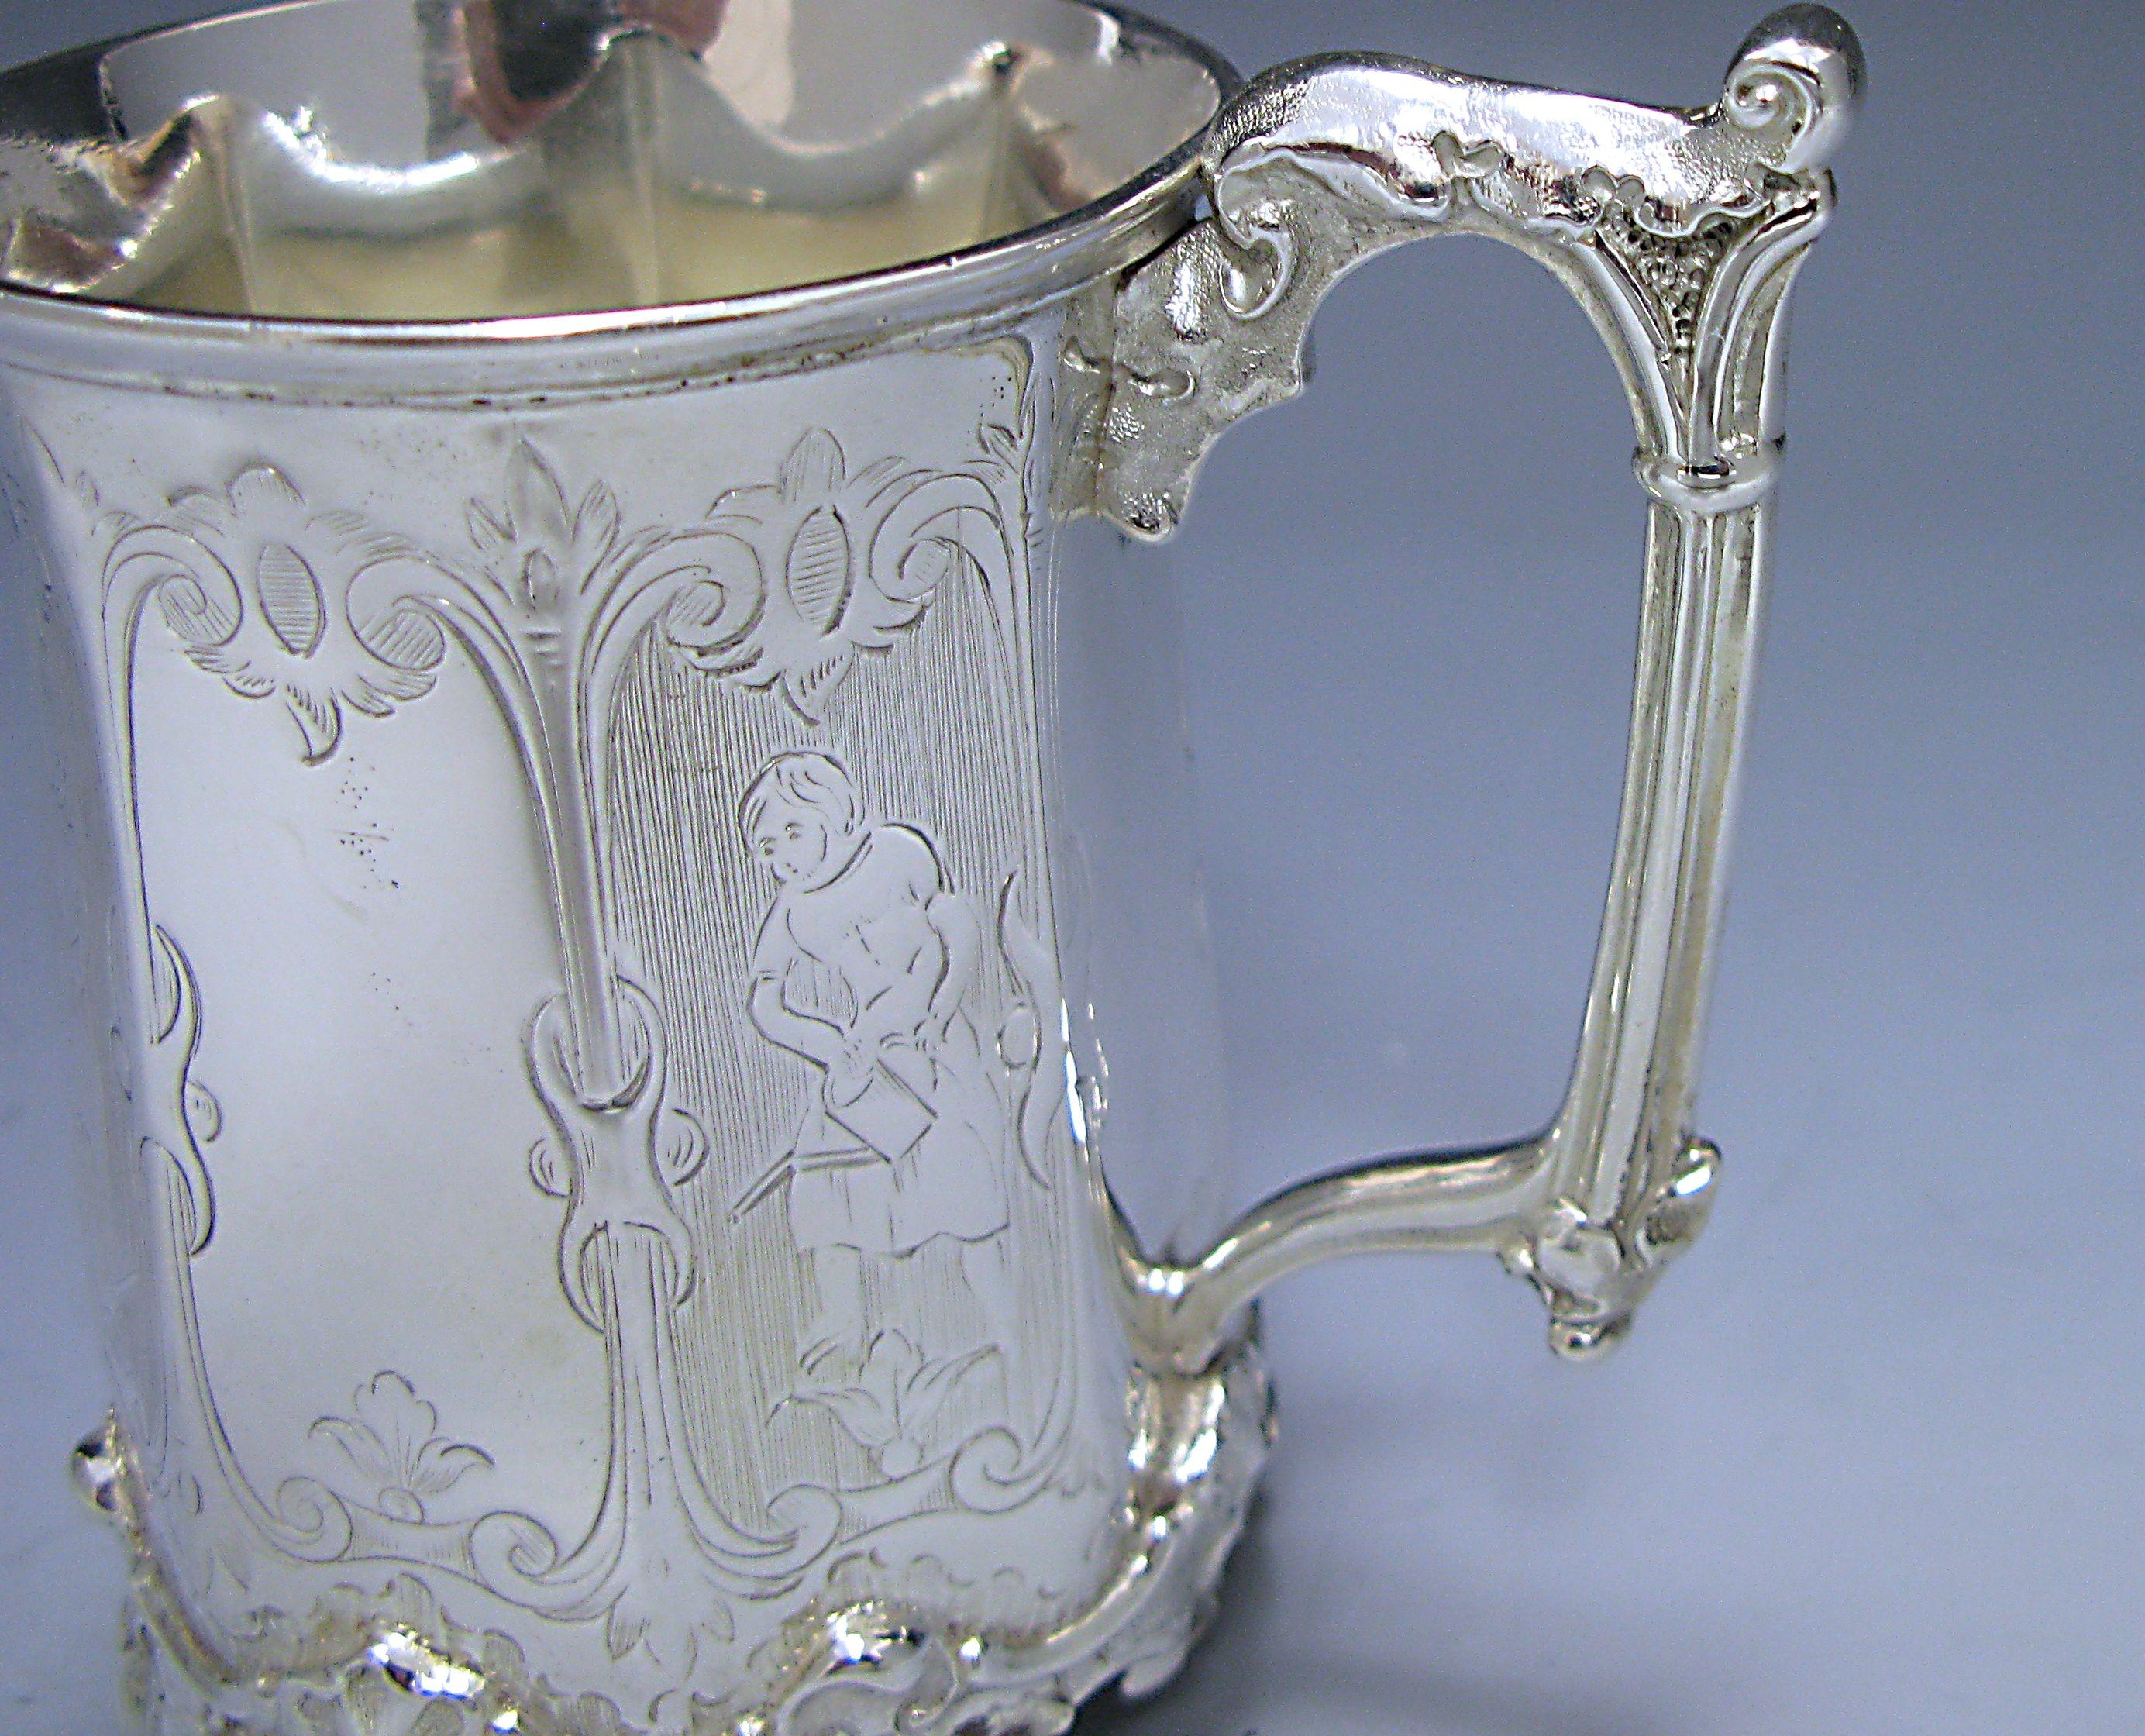 A Victorian antique silver octagonal sided Christening mug. The panel opposite the handled is engraved with flowers, four panels are engraved with figures depicting rural activities. The three remaining panels are plain apart from a floral design at